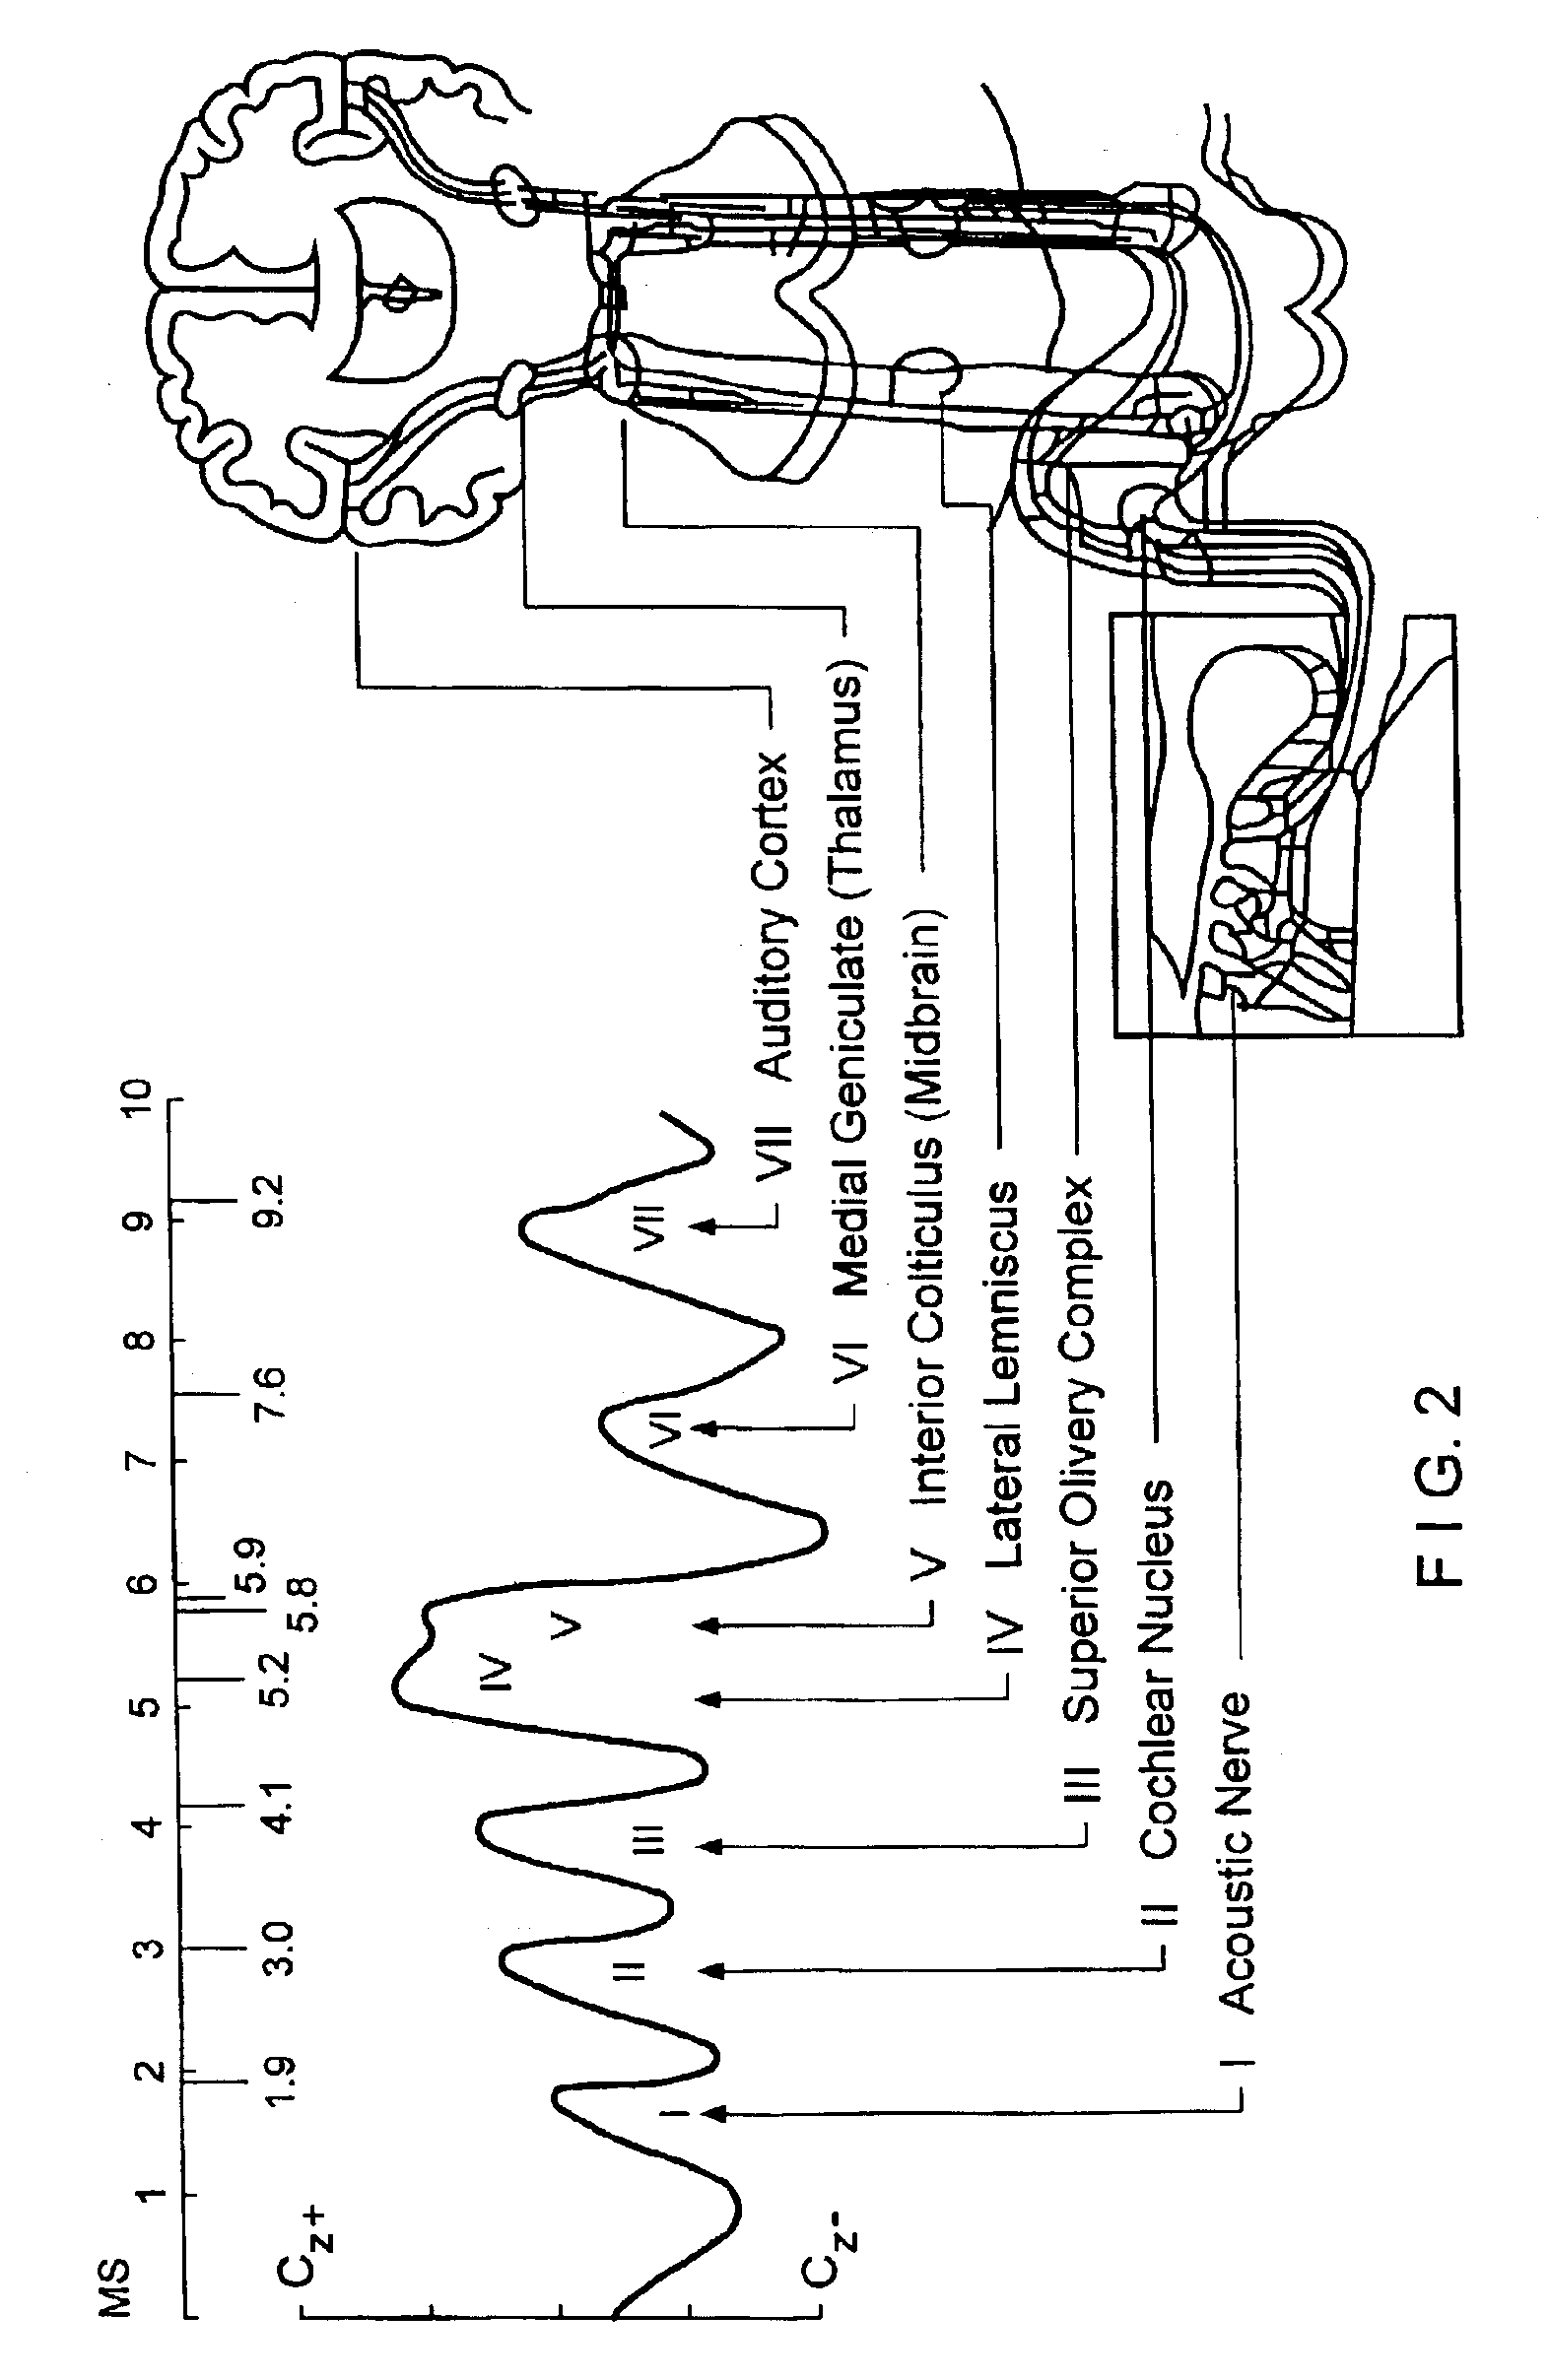 System and method for fetal brain monitoring